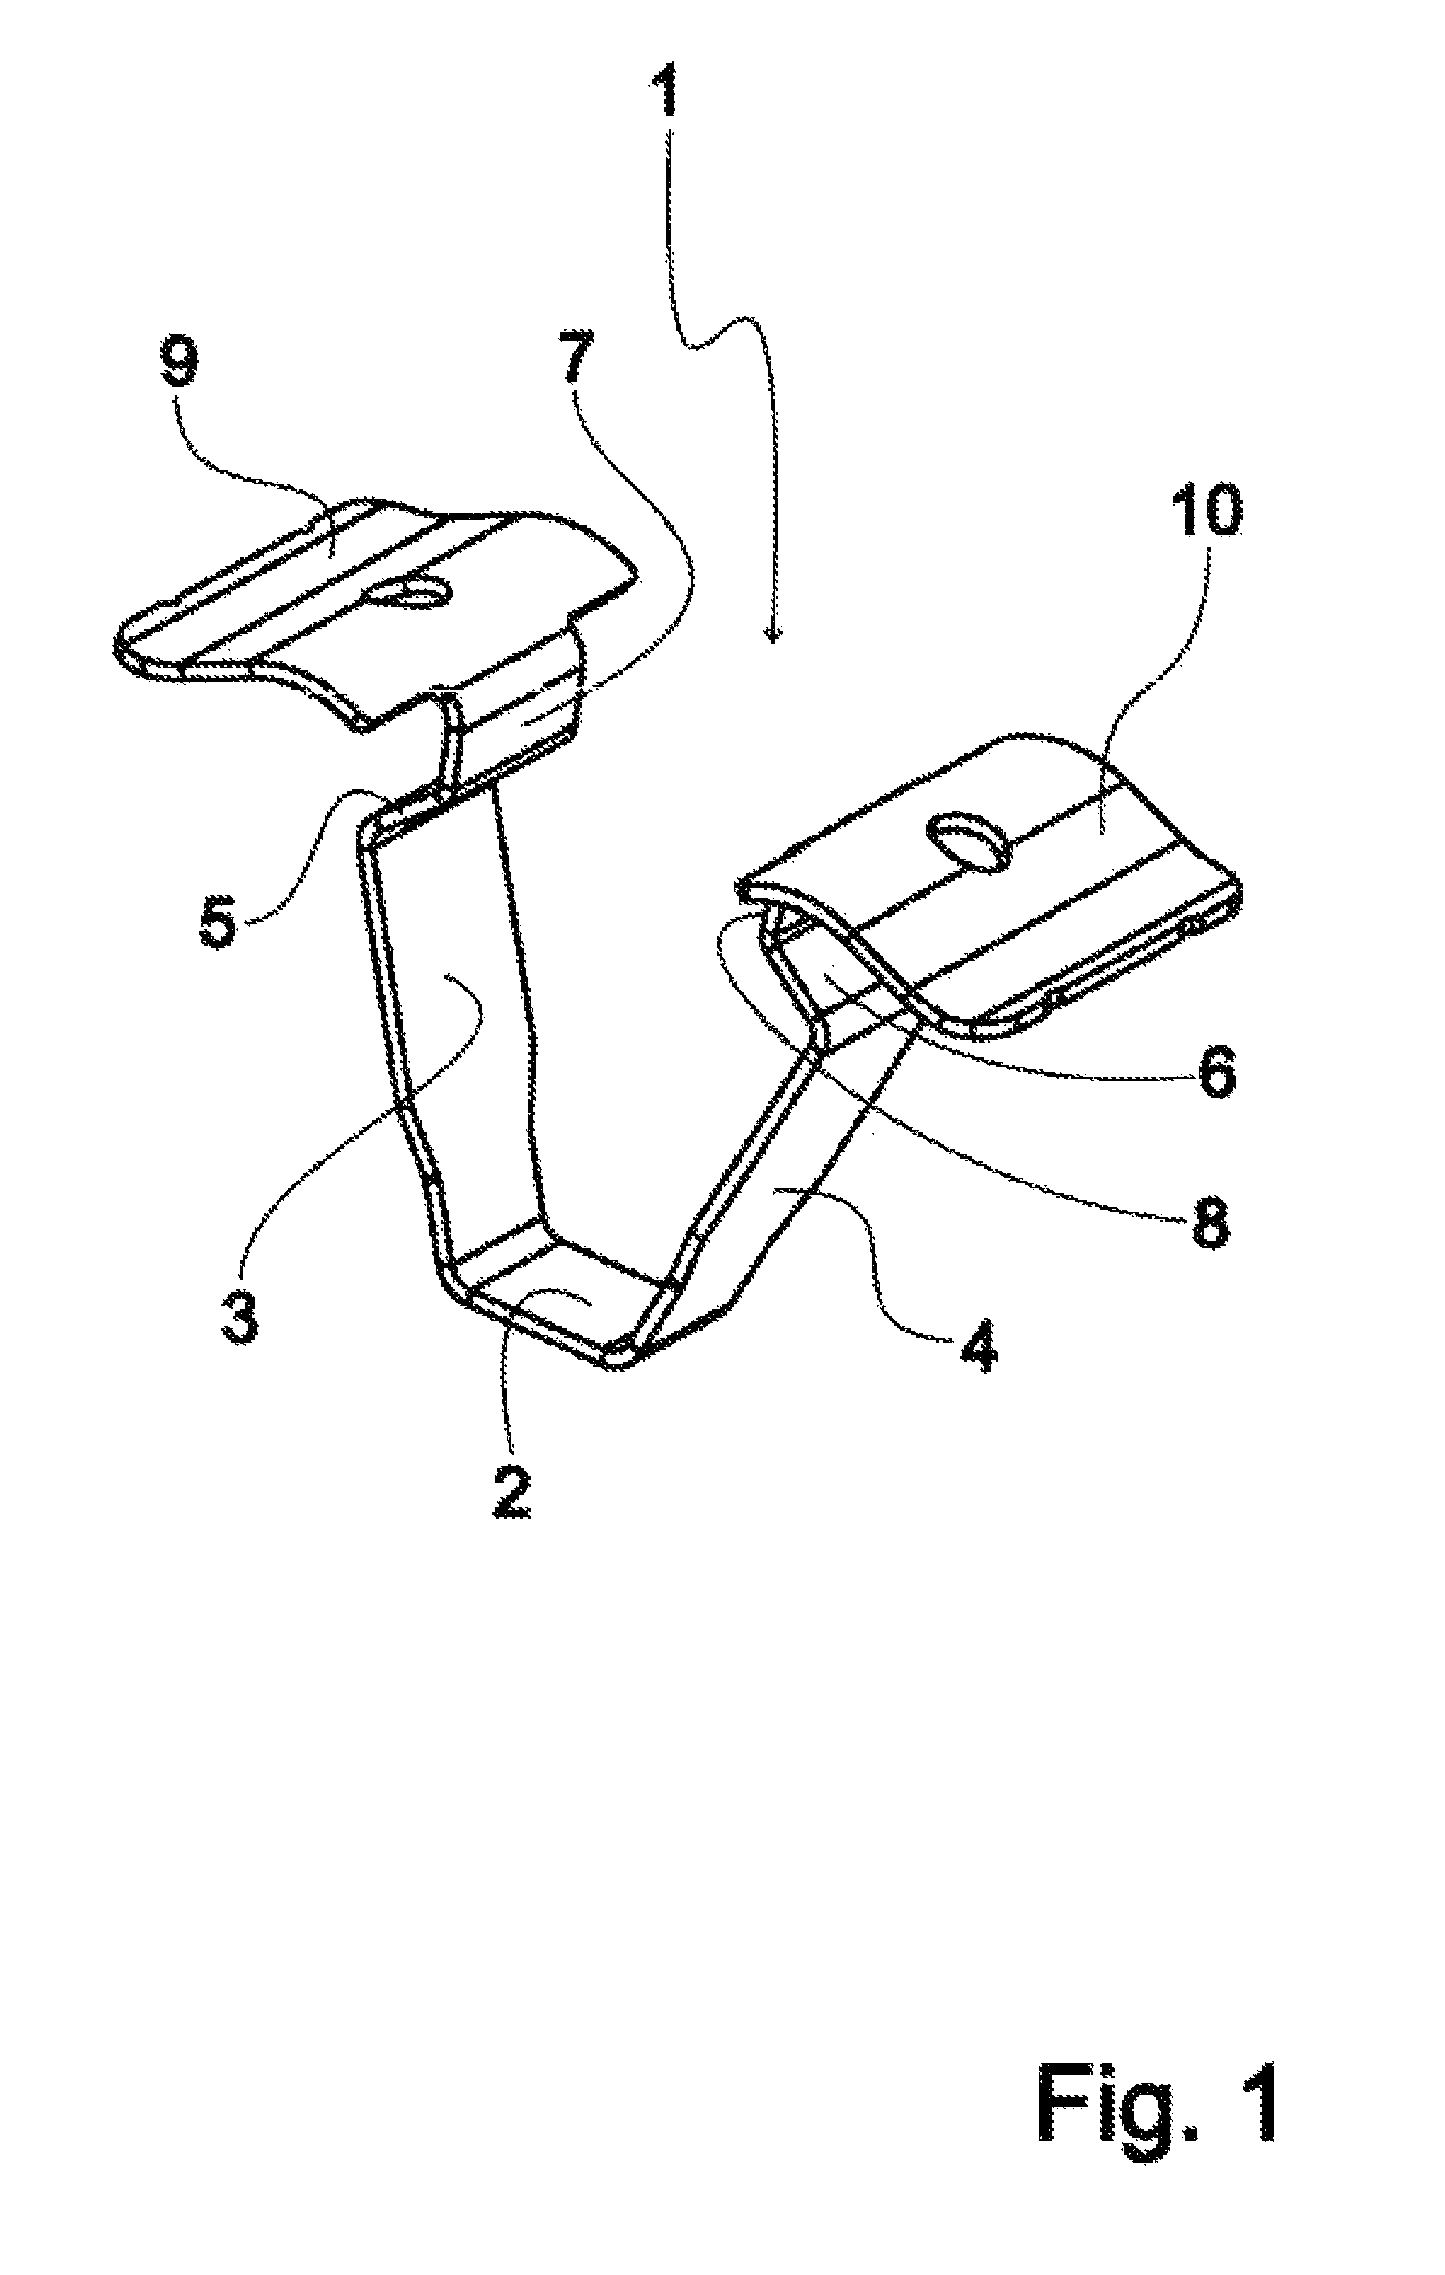 Device for attaching two add-on parts to a carrier part